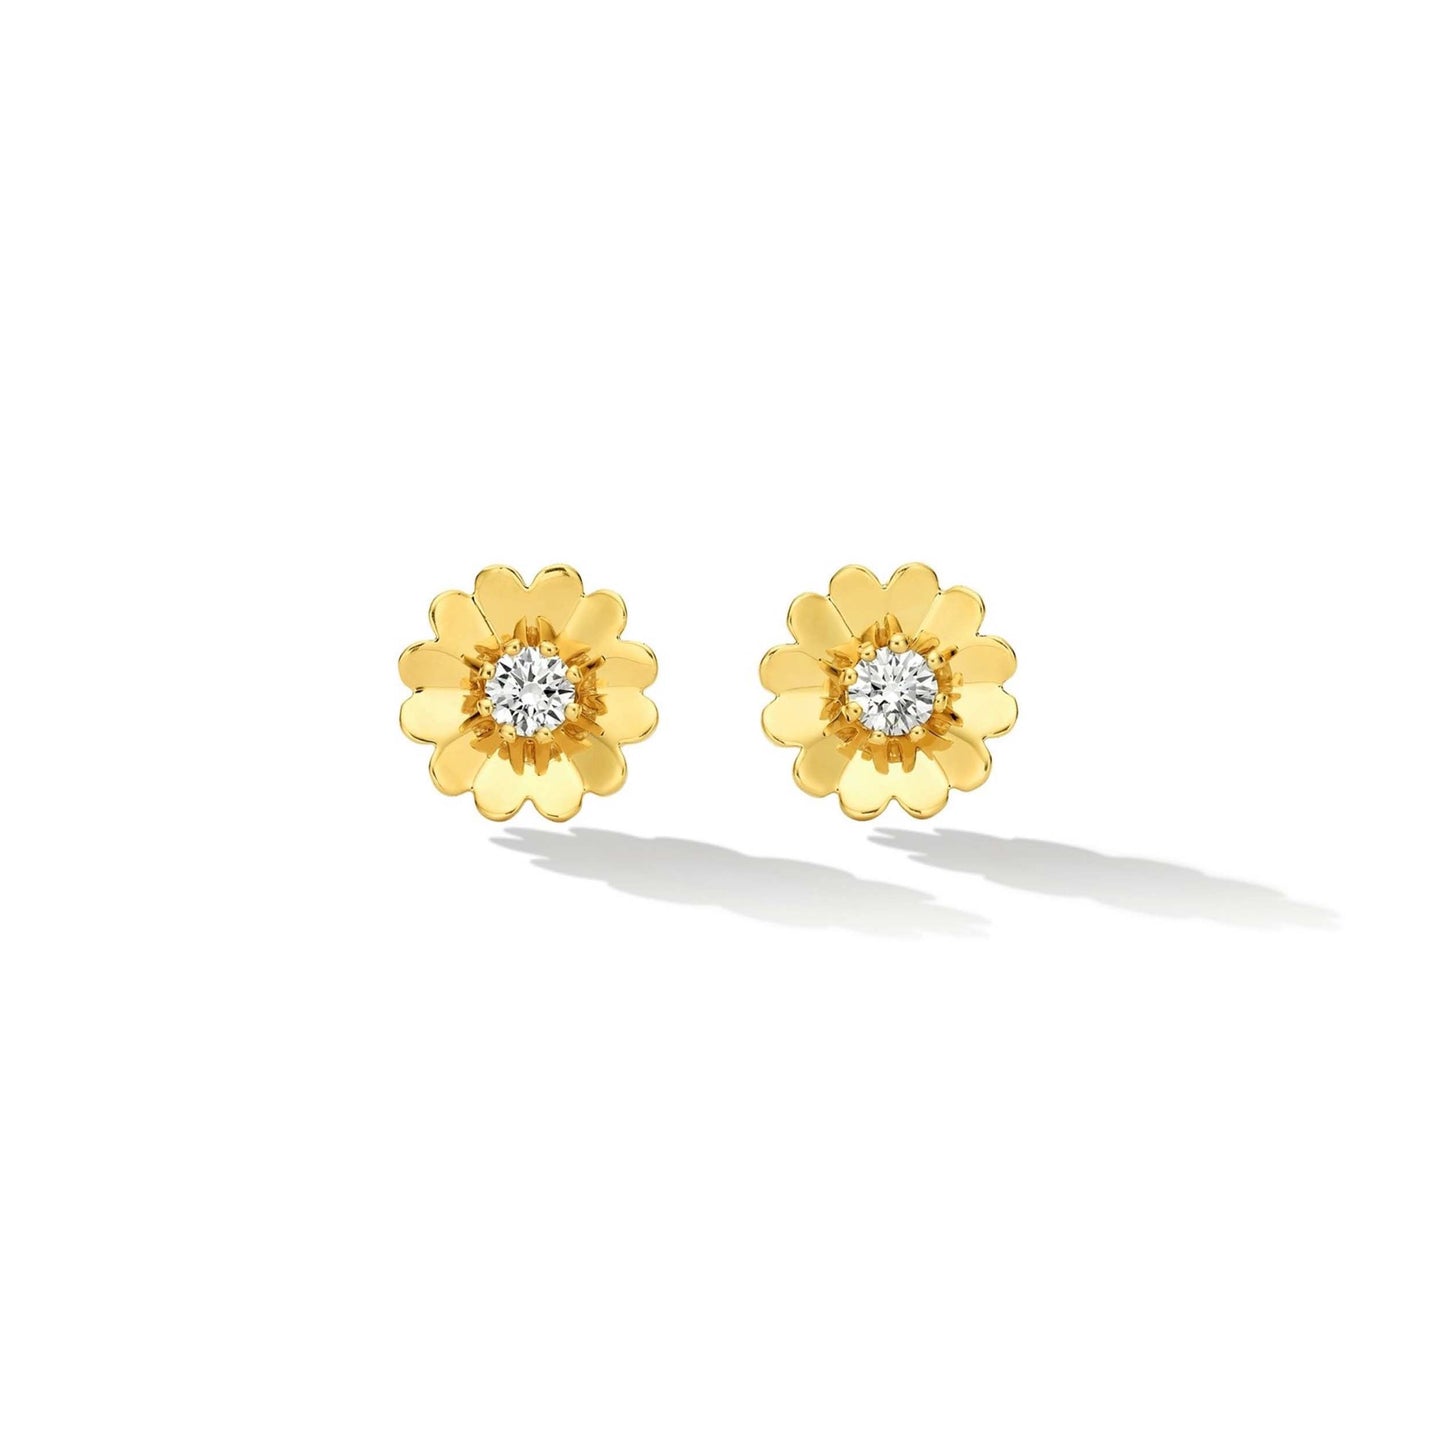 Yellow Gold Endless Stud Earrings with White Diamonds